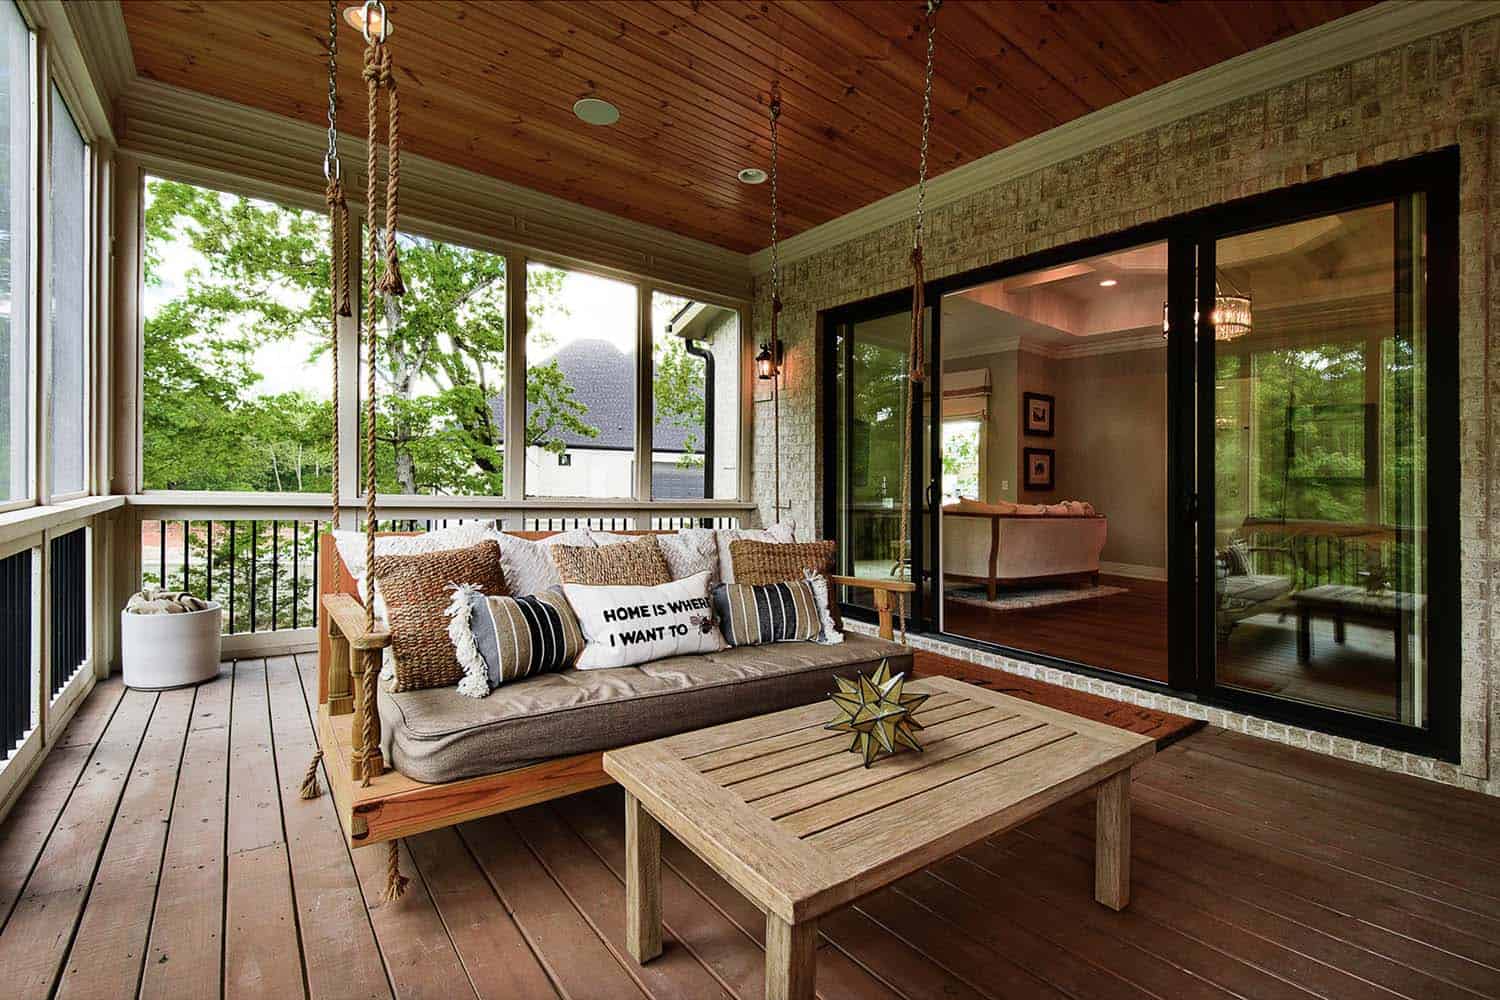 transitional style covered patio with a hanging swing